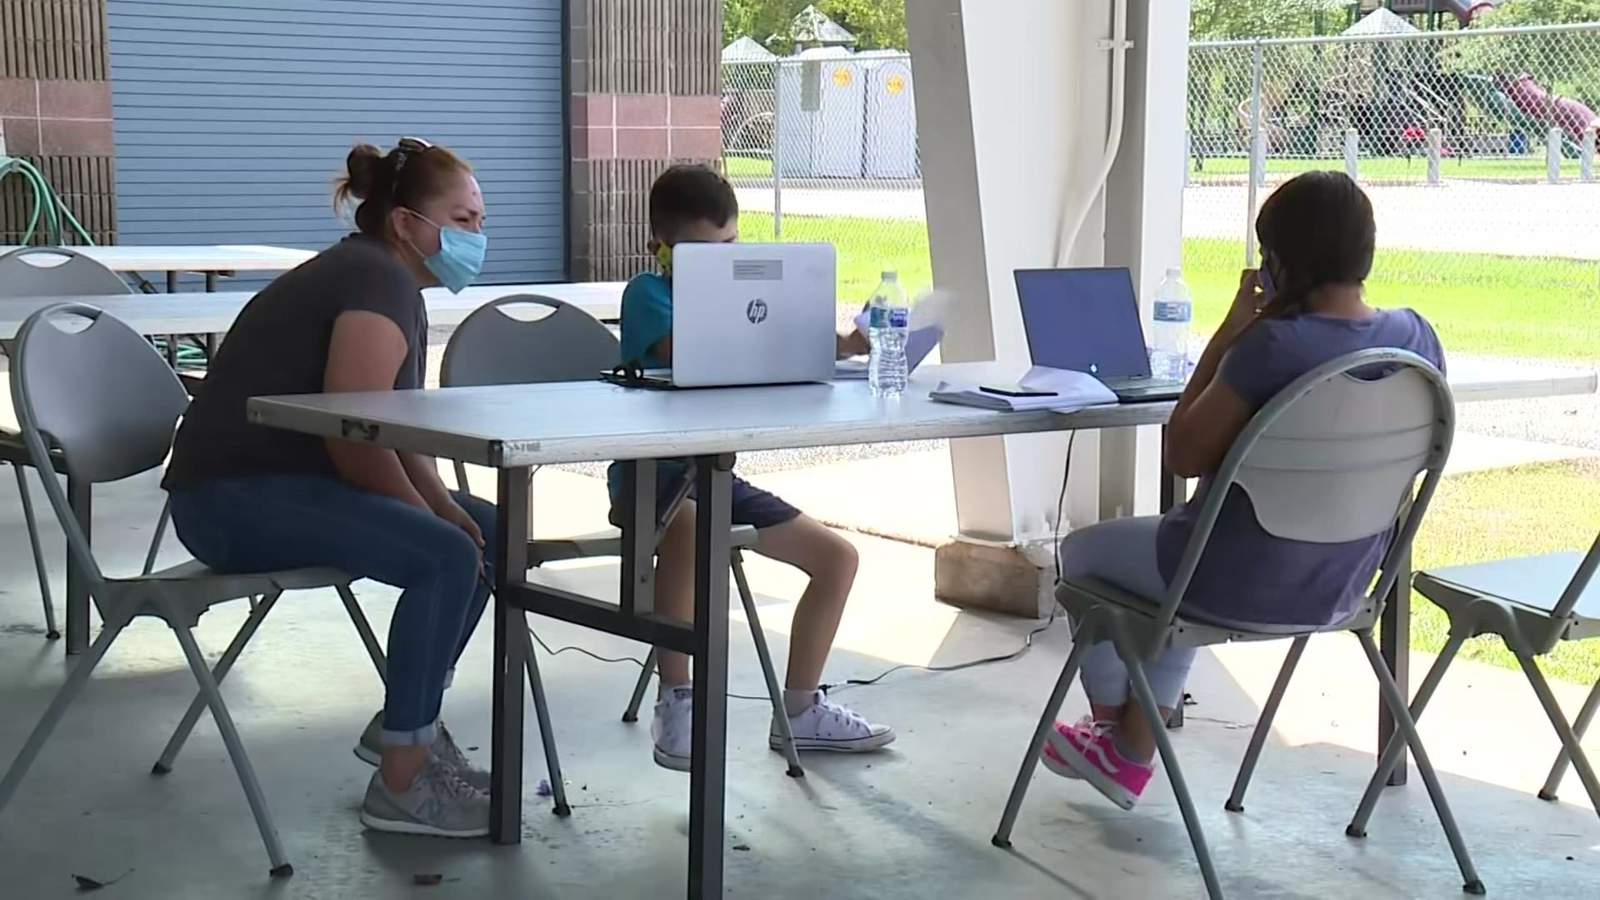 Study zones with free wifi help bridge digital divide for Harris County families